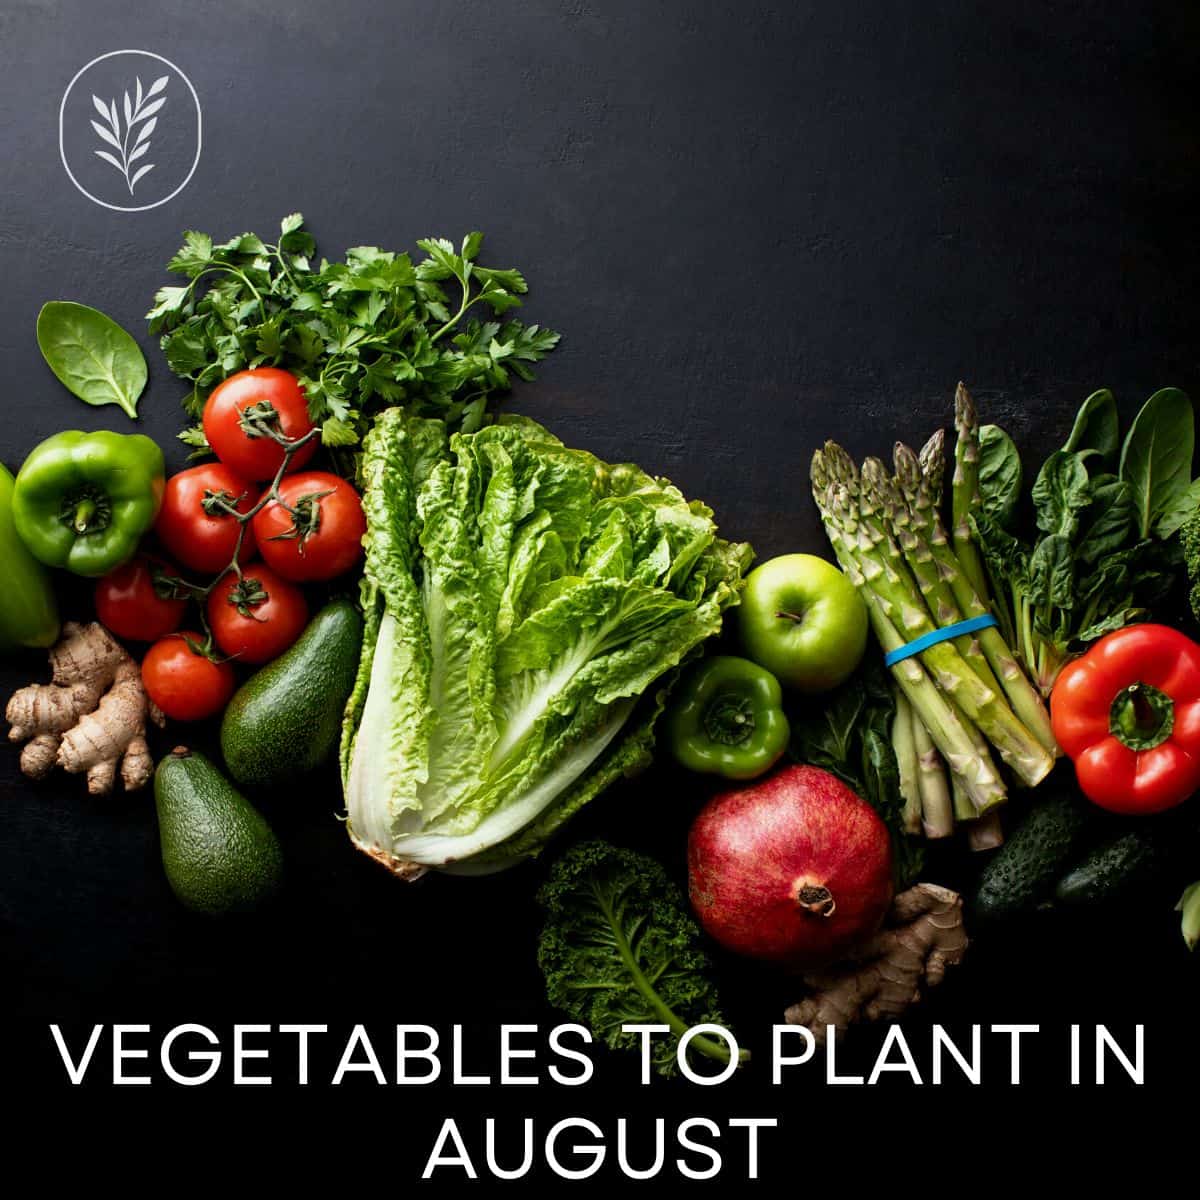 Vegetables to plant in august via @home4theharvest